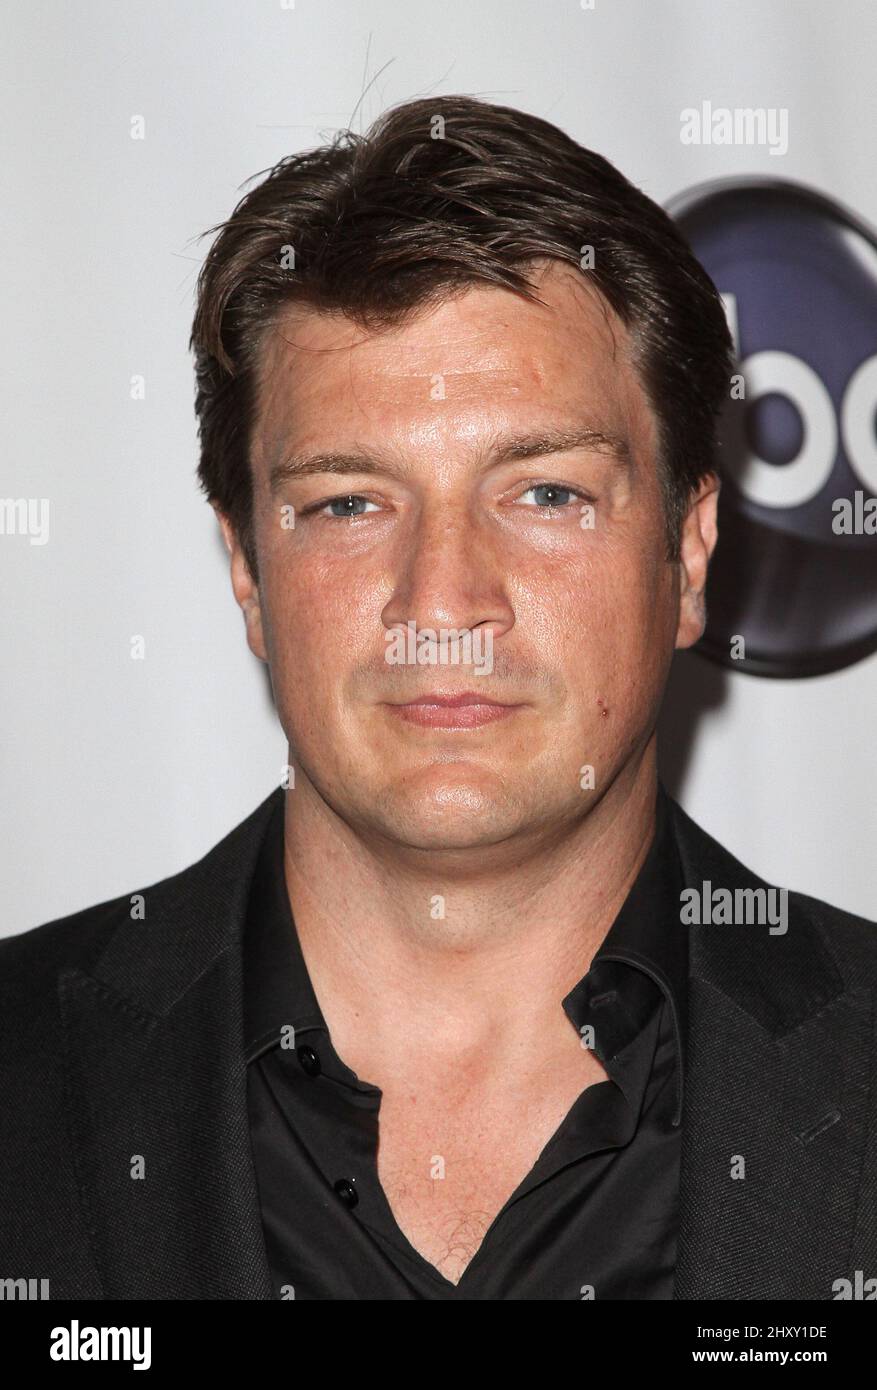 Nathan Fillion nimmt an der Finalparty „Desperate Housewives“ im W Hollywood Hotel in Los Angeles, USA, Teil. Stockfoto